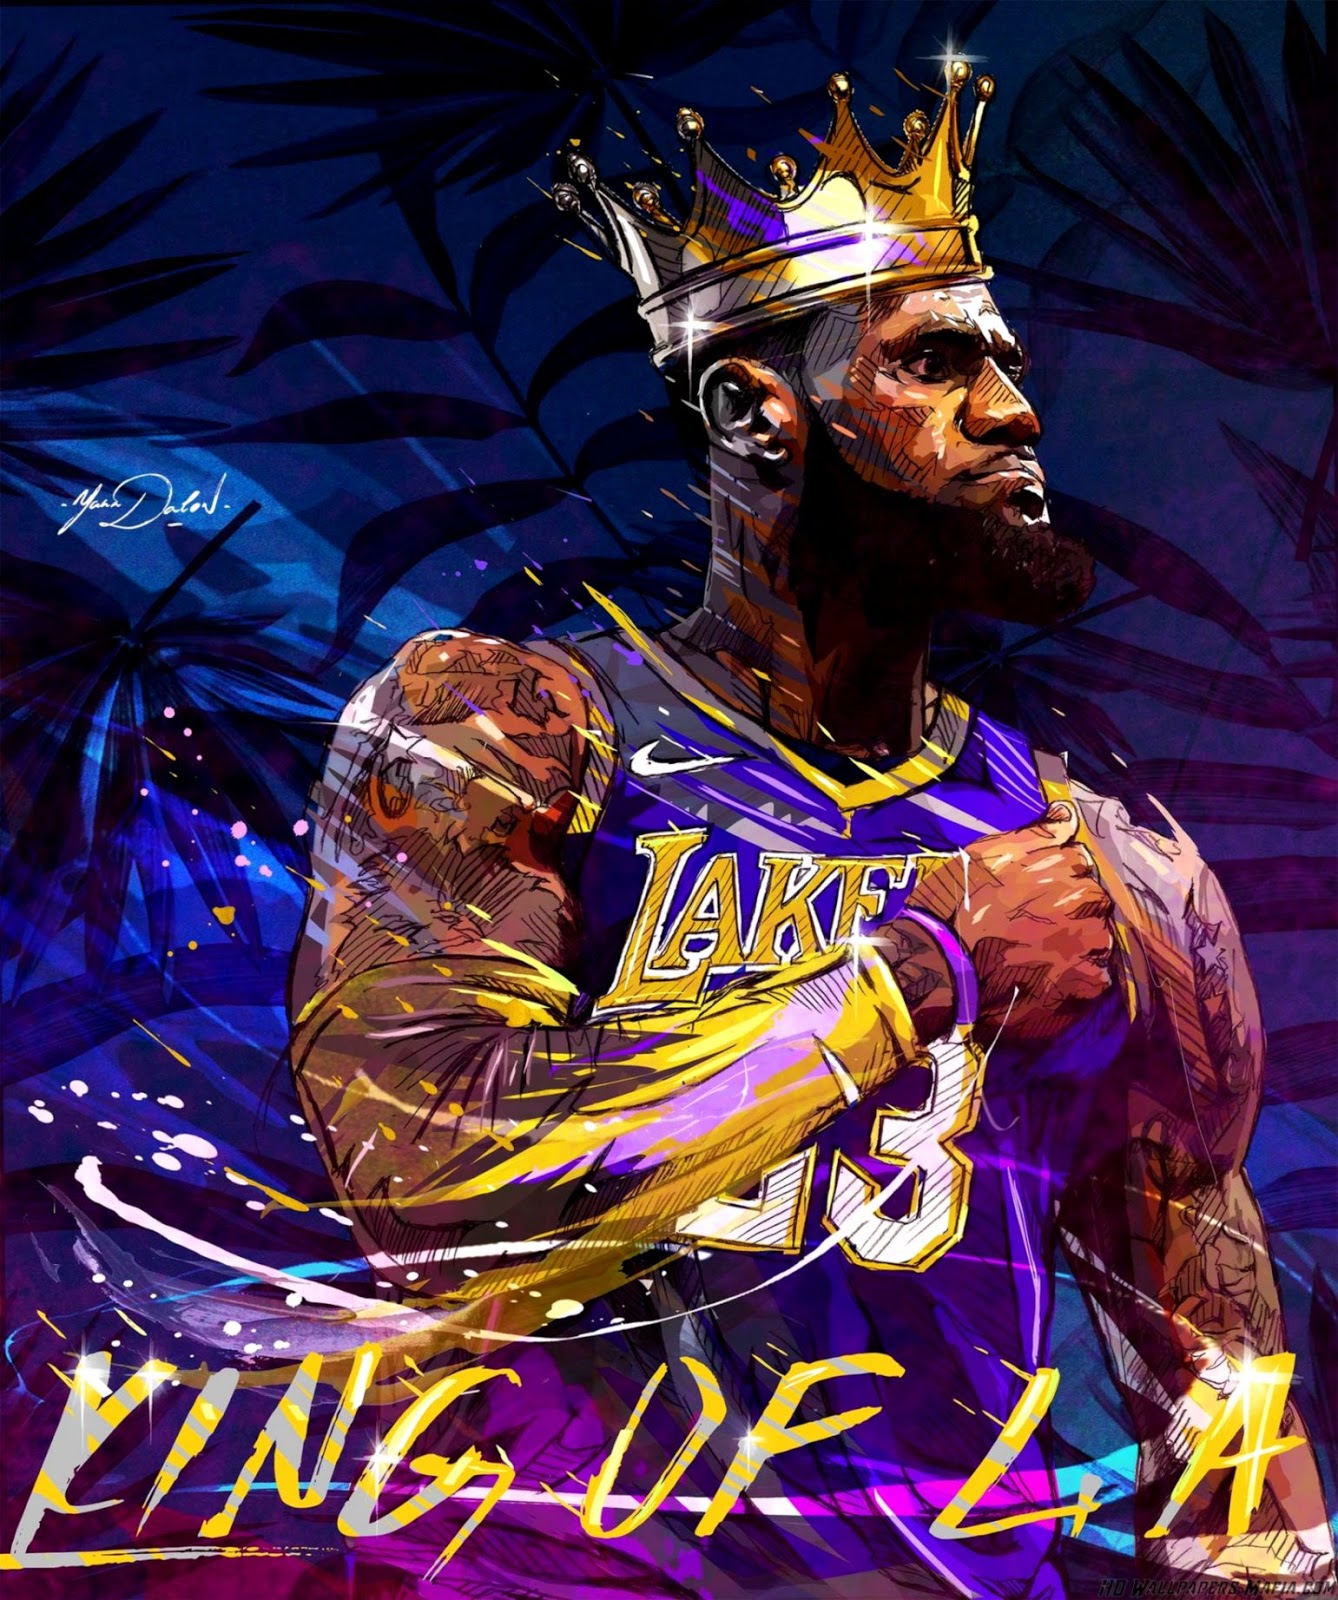 Lebron james with black and white background and lakers yellow jersey 4K  wallpaper download